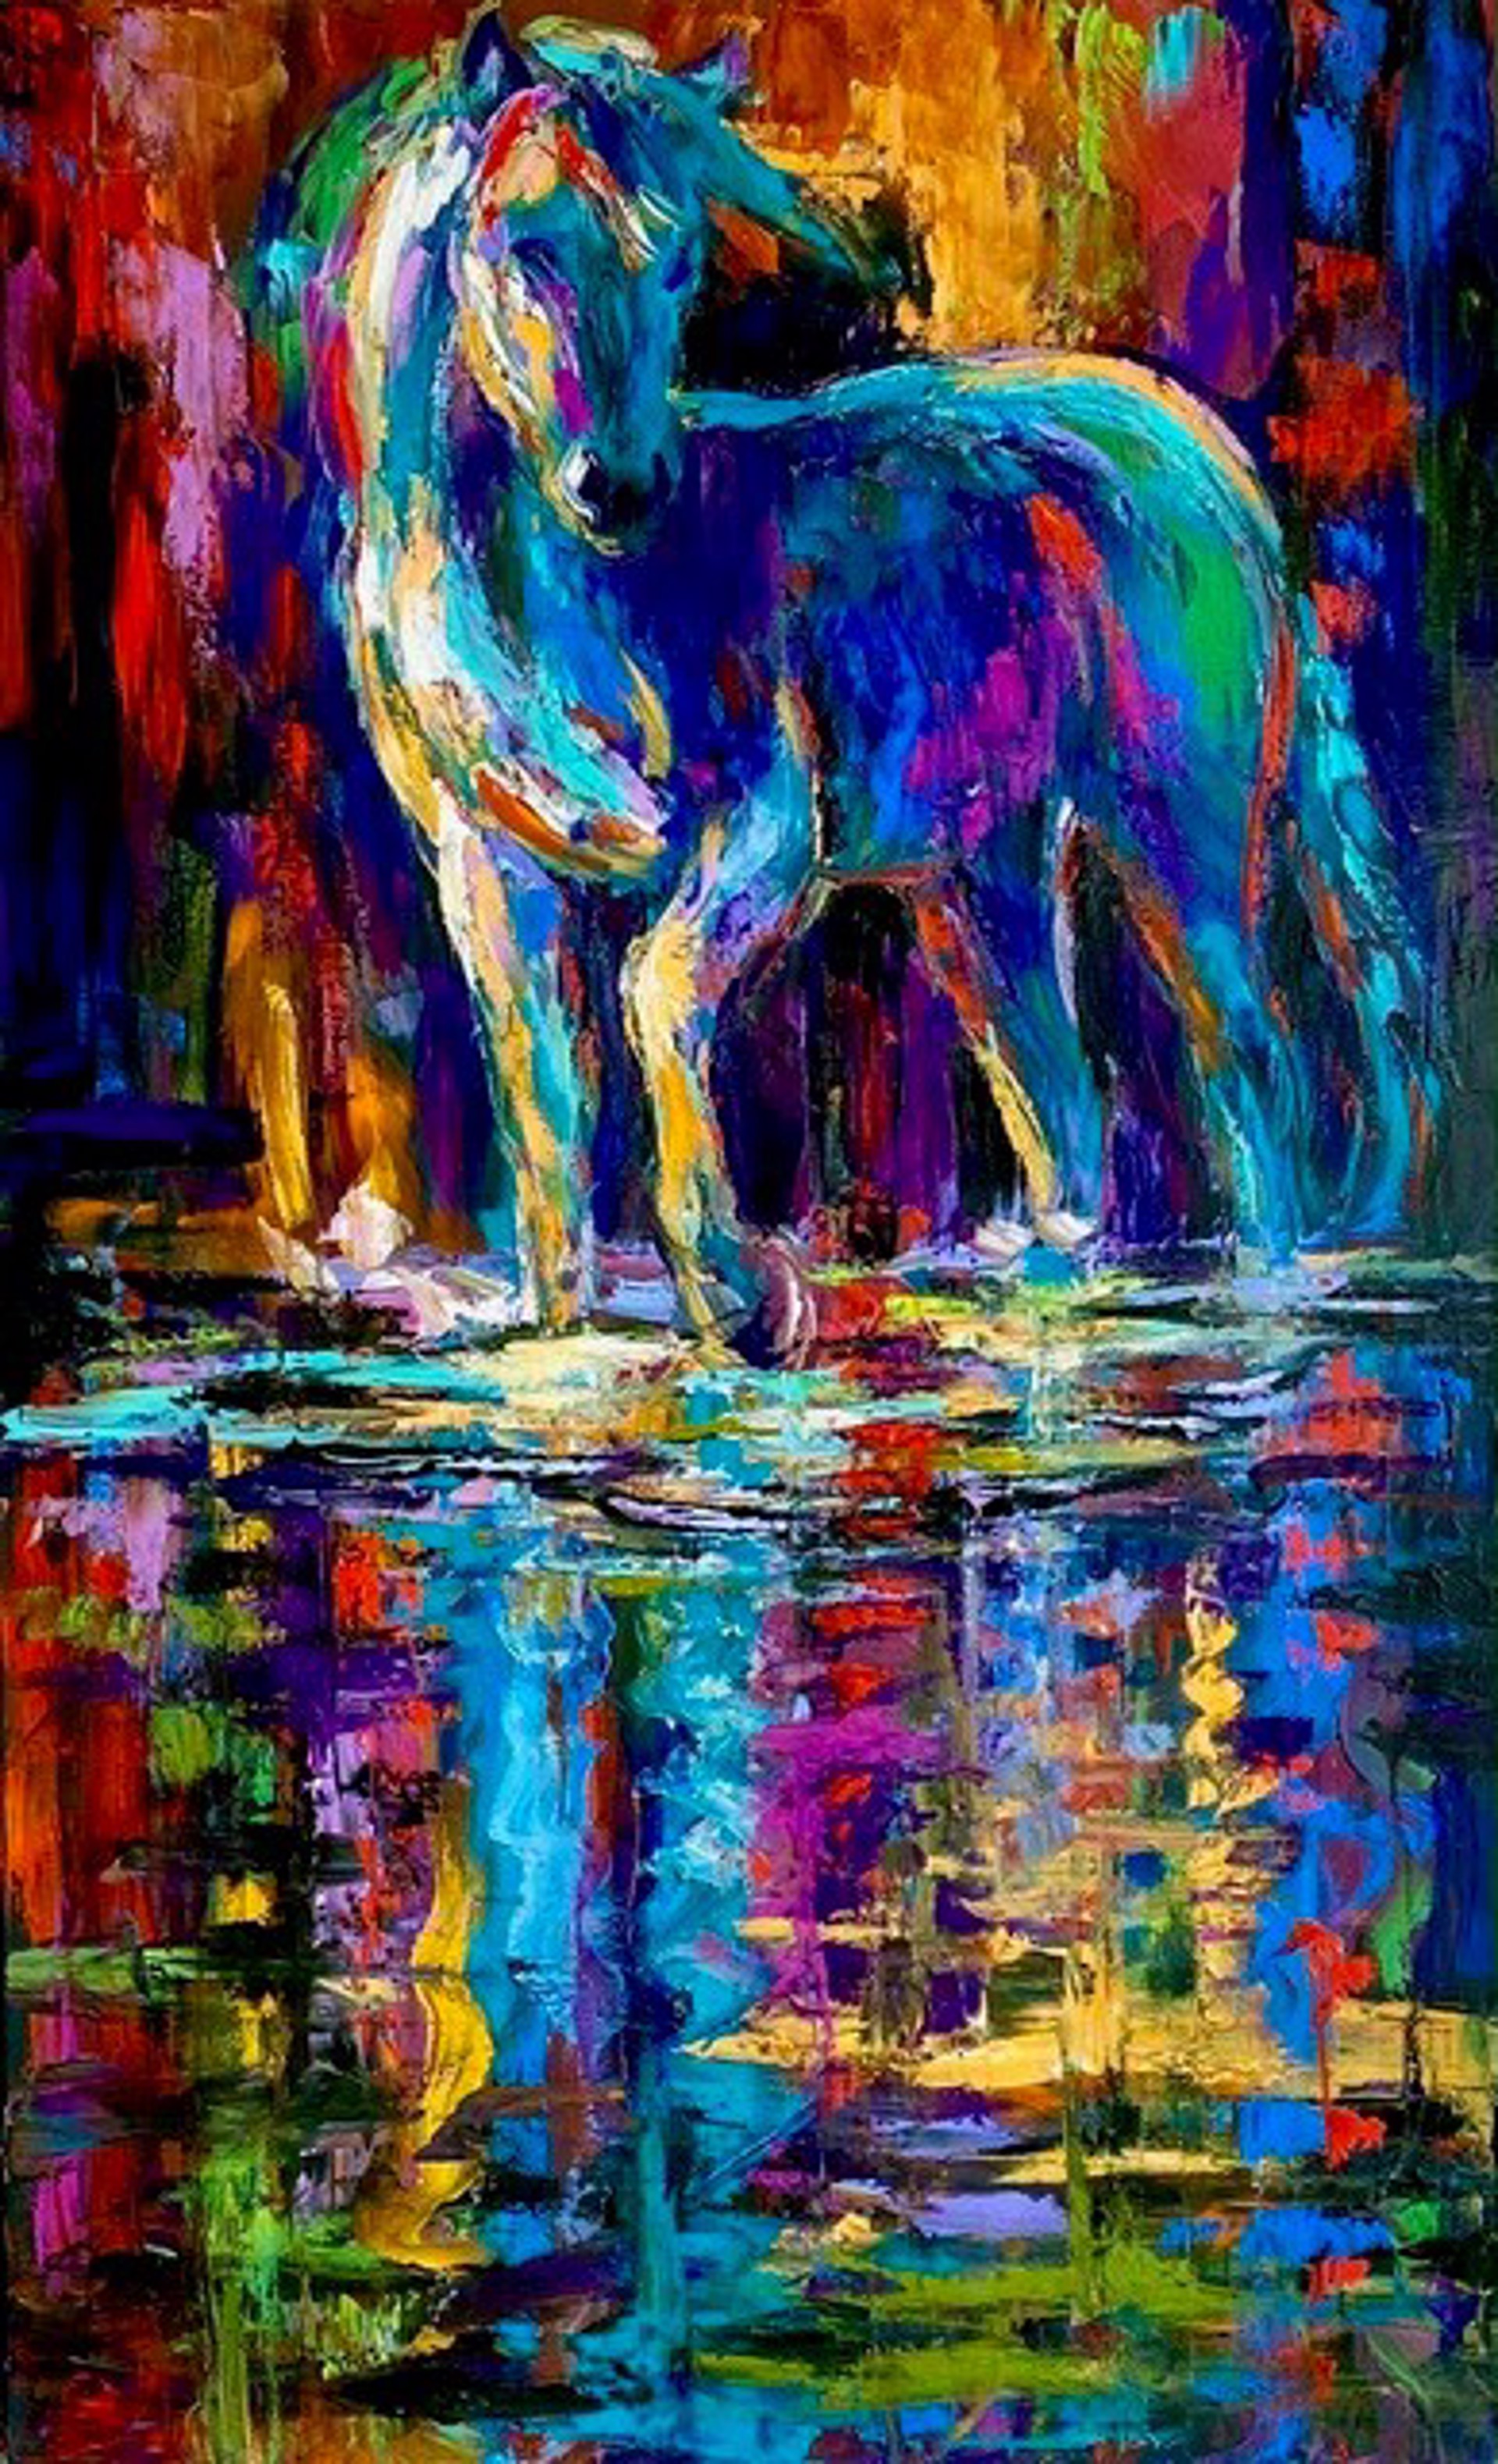 Testing the Waters, Salt River ~ a Salt River wild horse dips his toe into the cool waters that sustain his herd. by Barbara Meikle